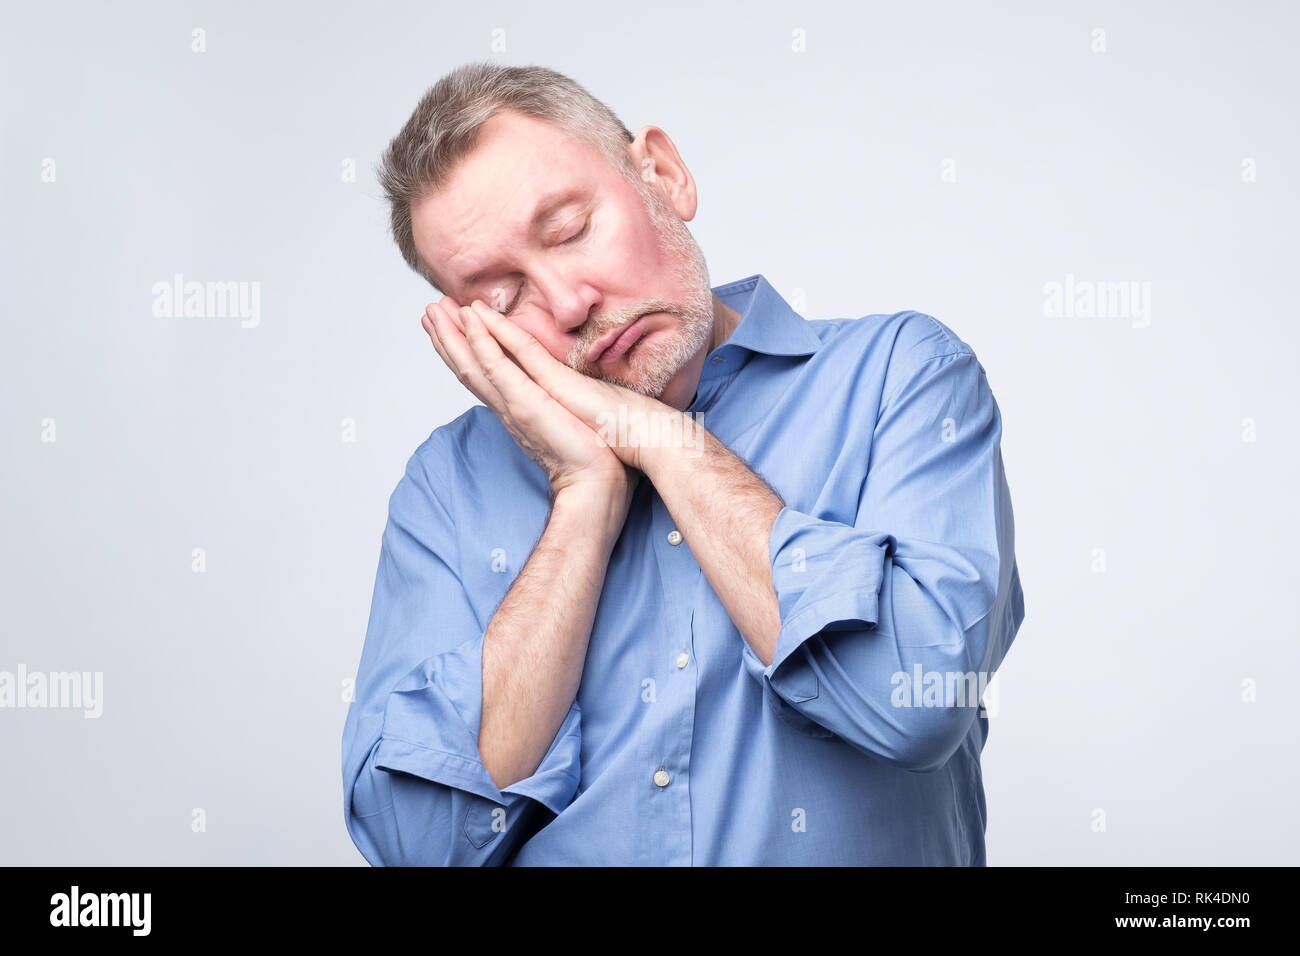 European man in blue shirt being tired sleeping on hands. Stock Photo